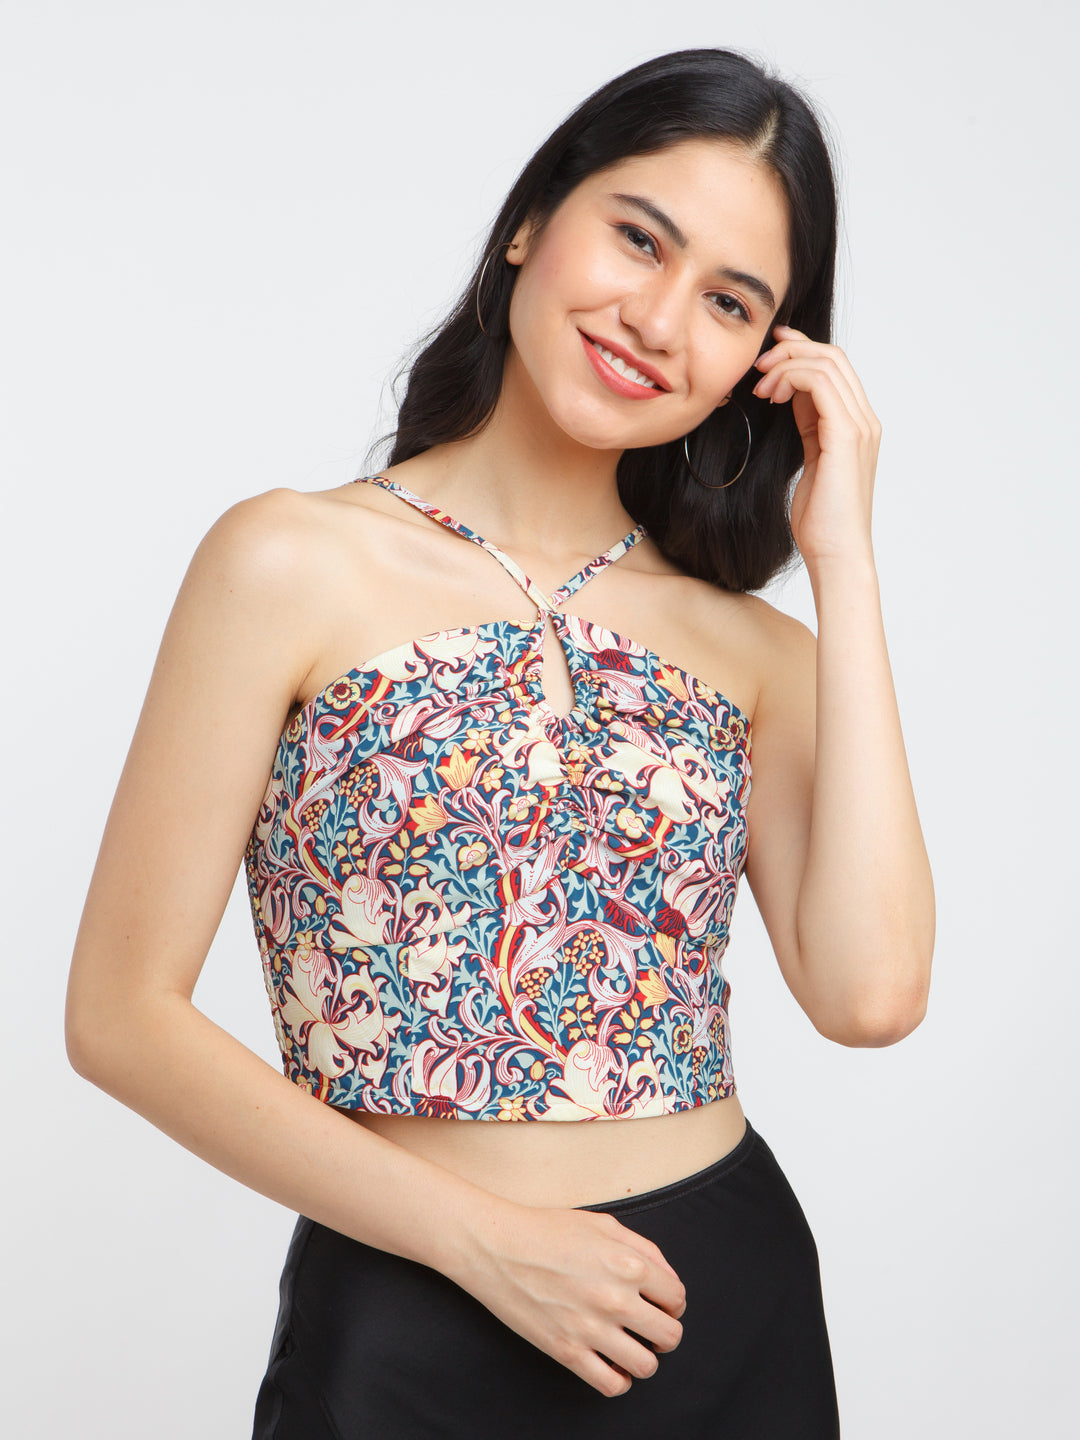 Multicolored Printed Offhoulder Top For Women